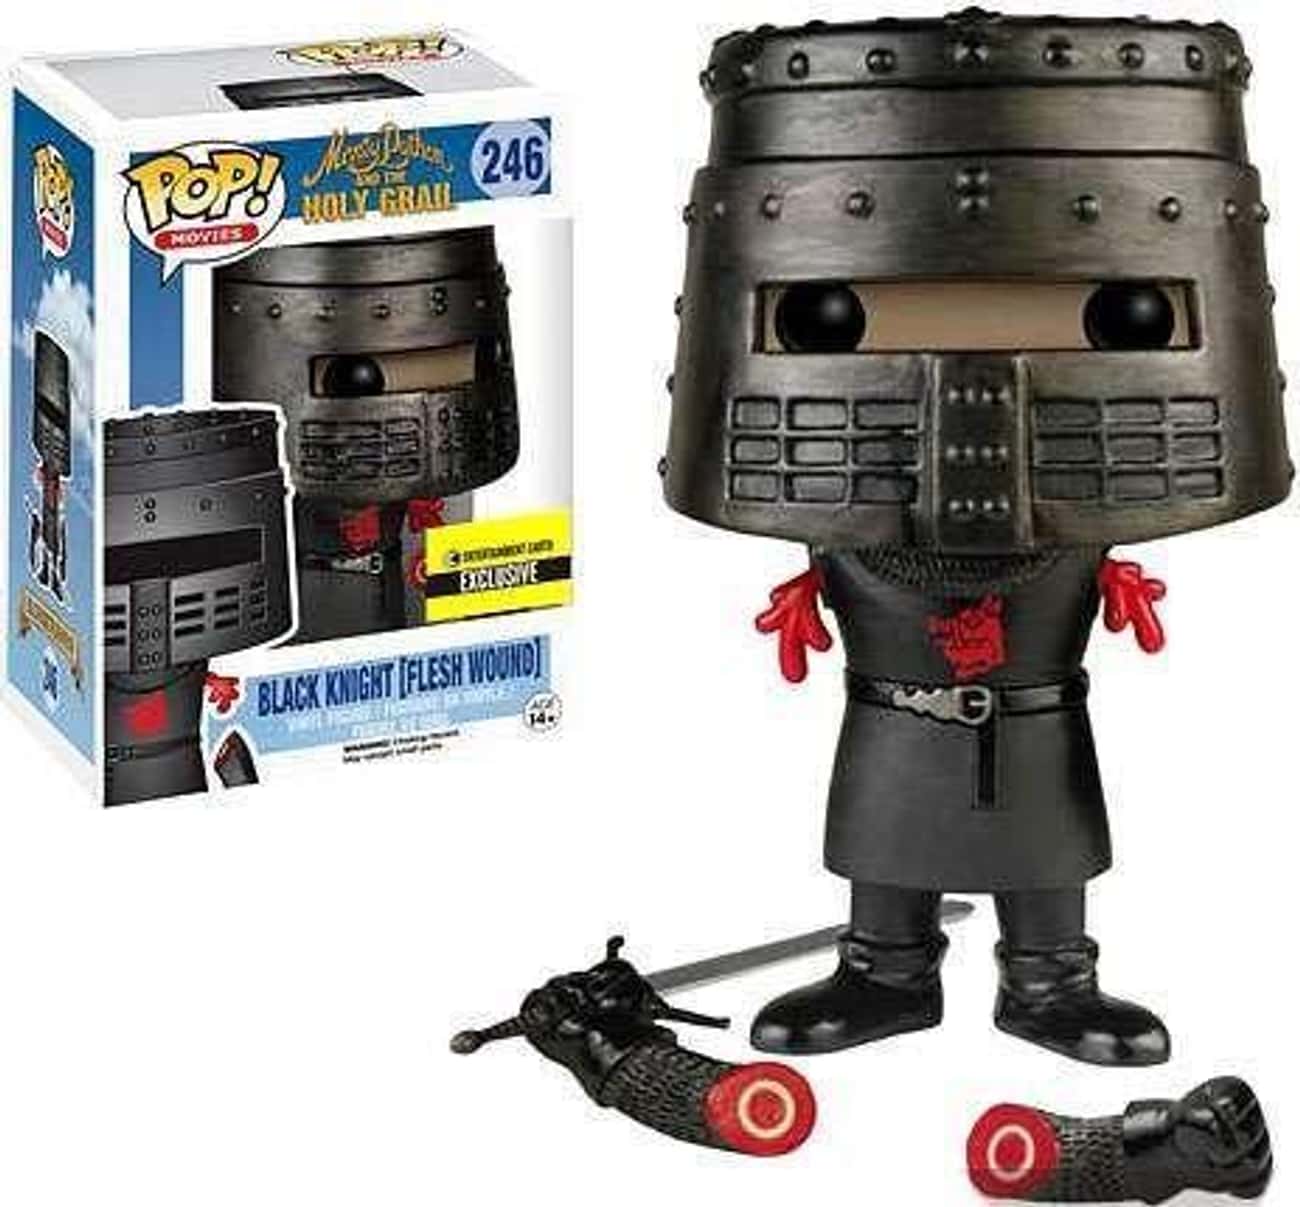 Flesh Wound Black Knight ('Monty Python and the Holy Grail')